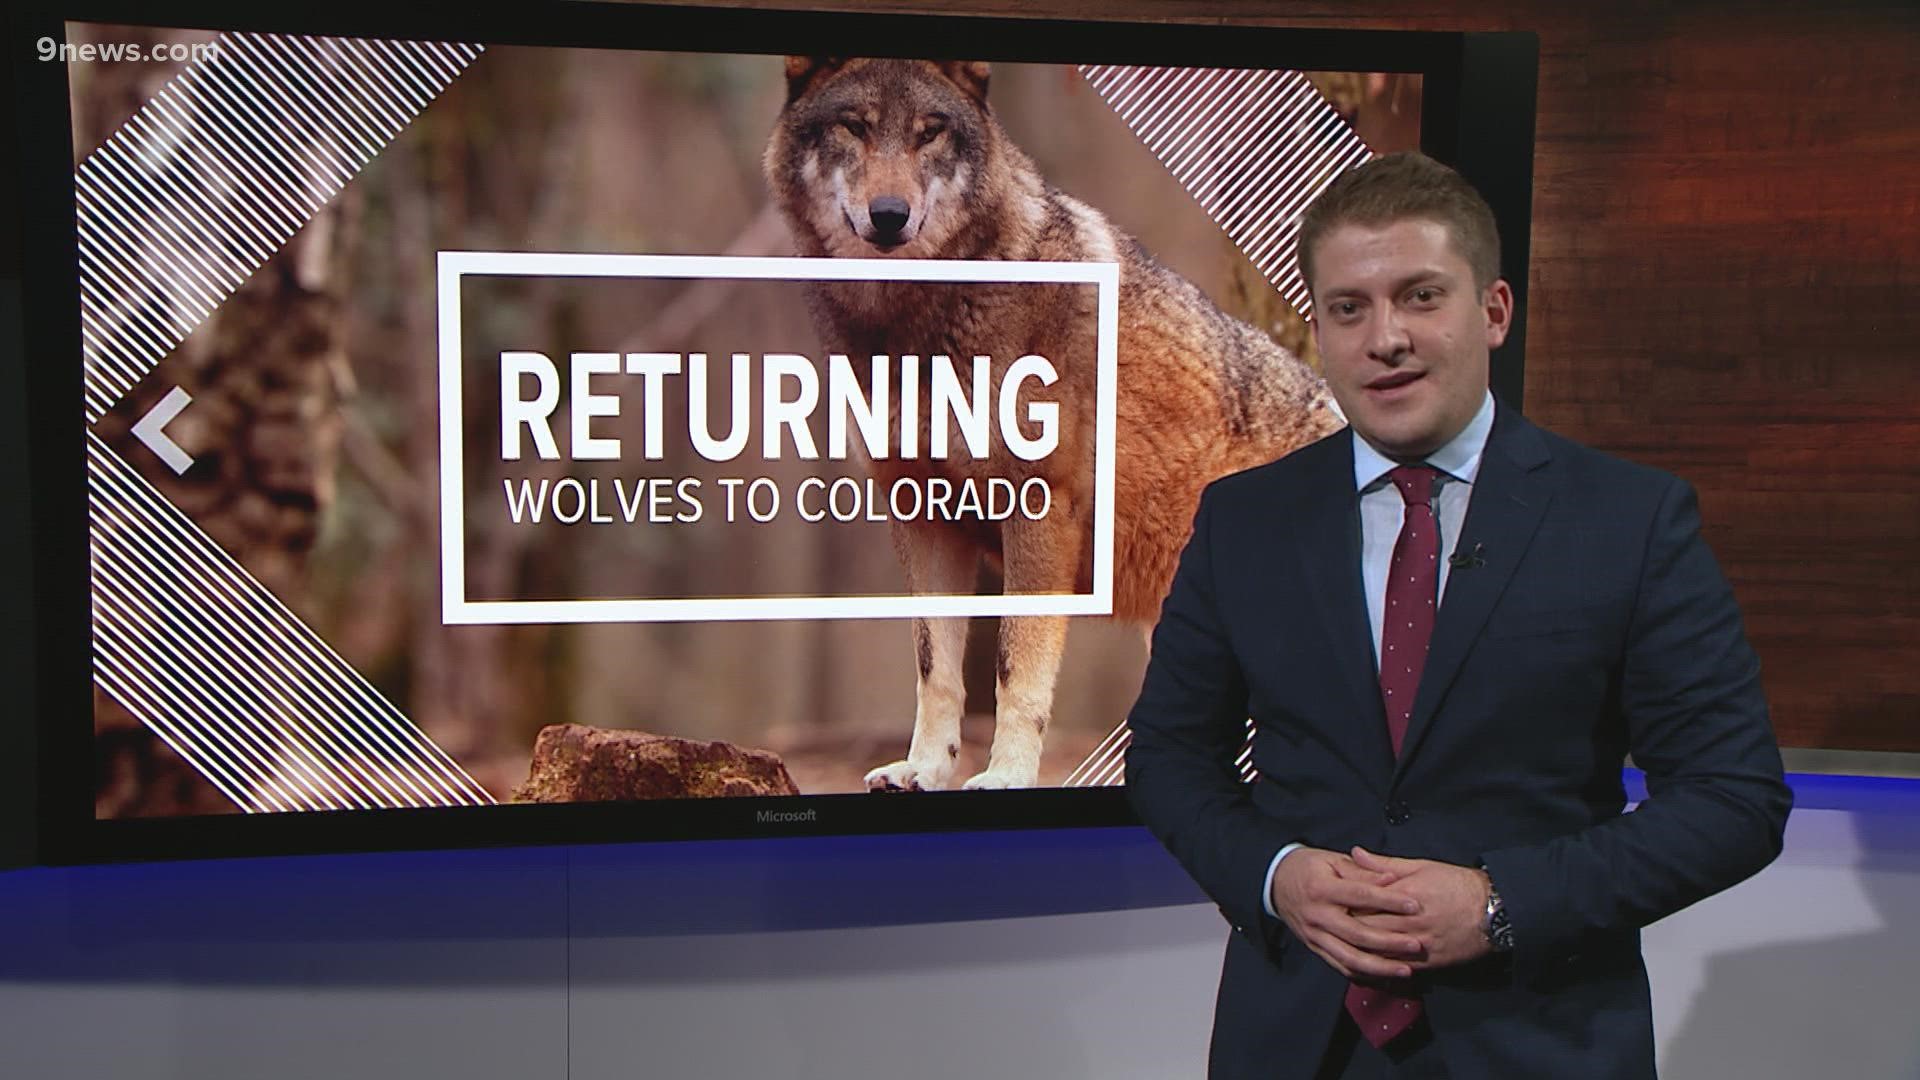 The newest Coloradans are causing all kinds of problems. A look at the options for ranchers trying to coexist with wolves.